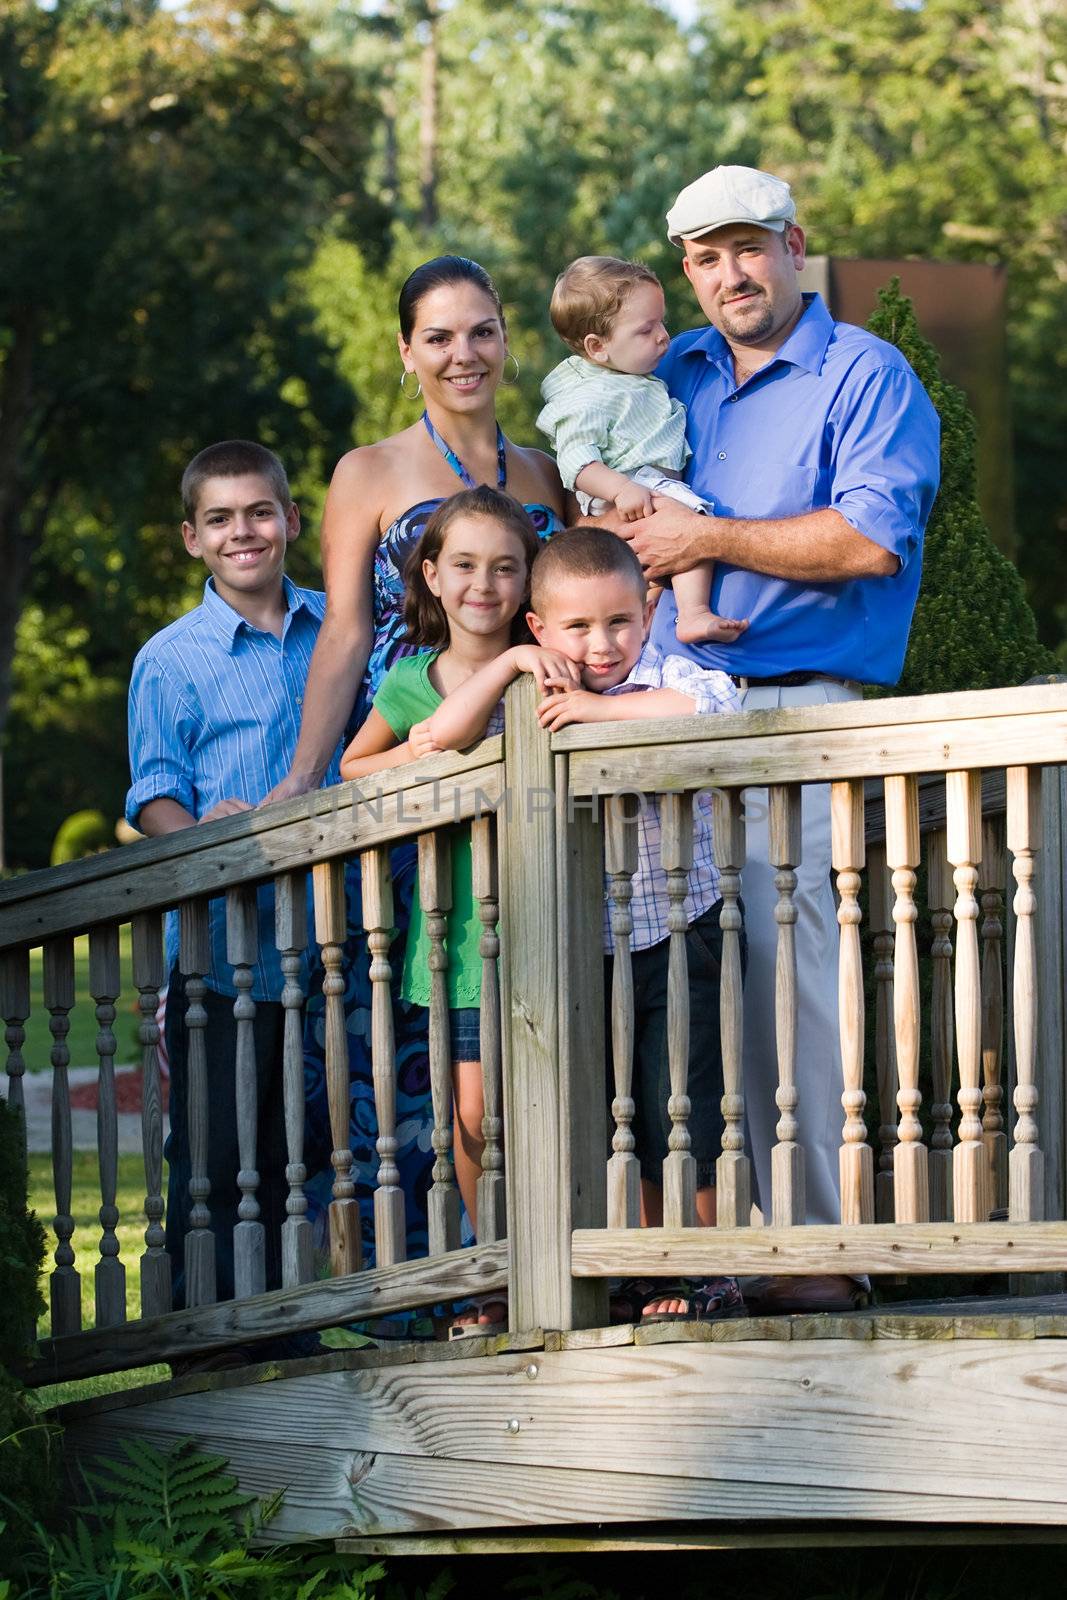 Portrait of an attractive young family with four children posing in a park on a wooden walking bridge.